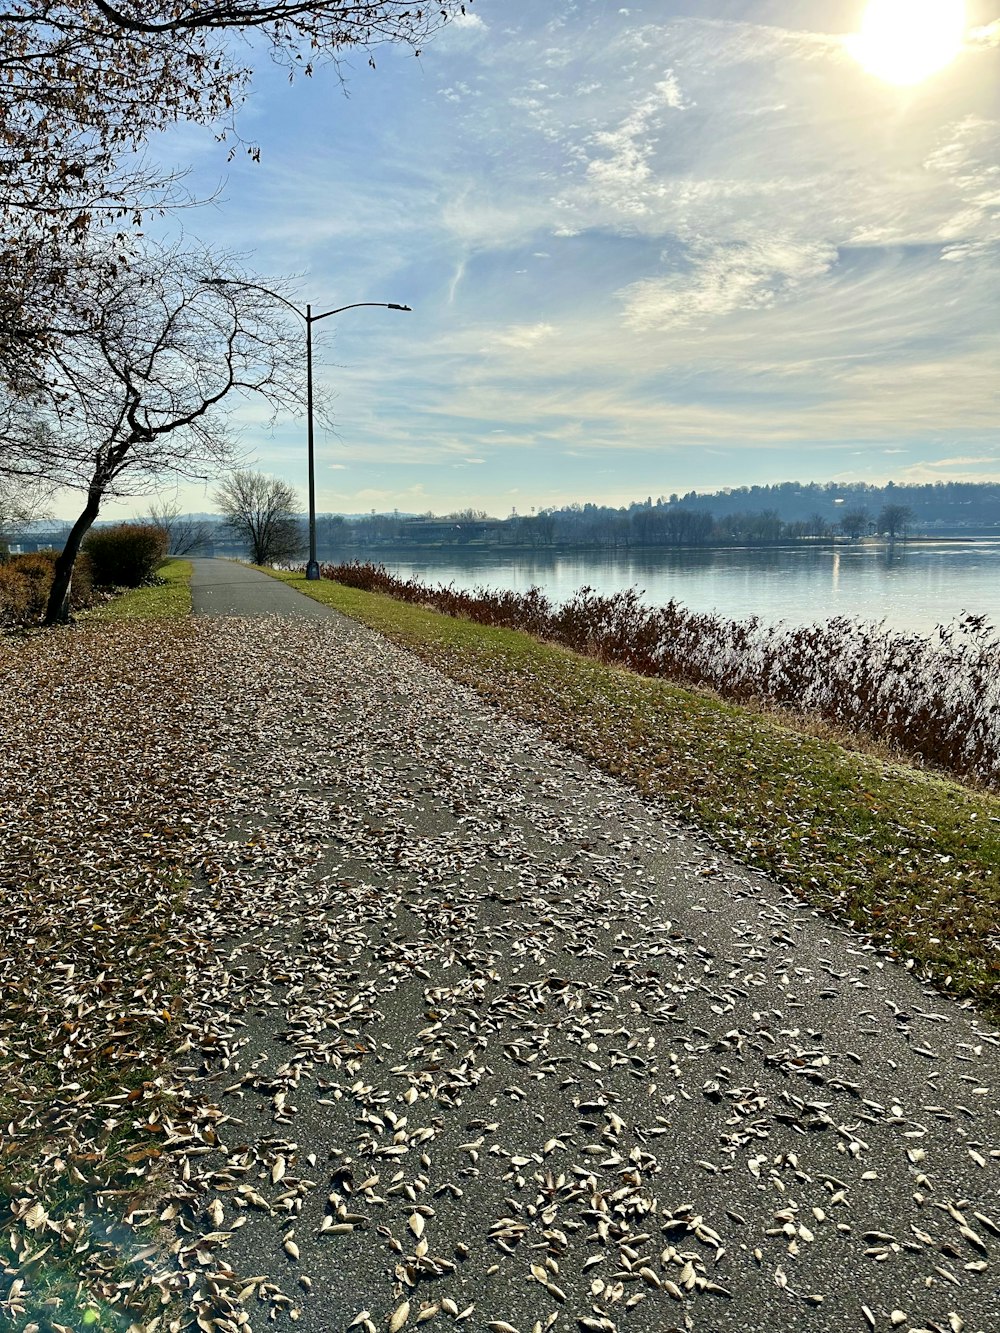 a path next to a body of water on a sunny day